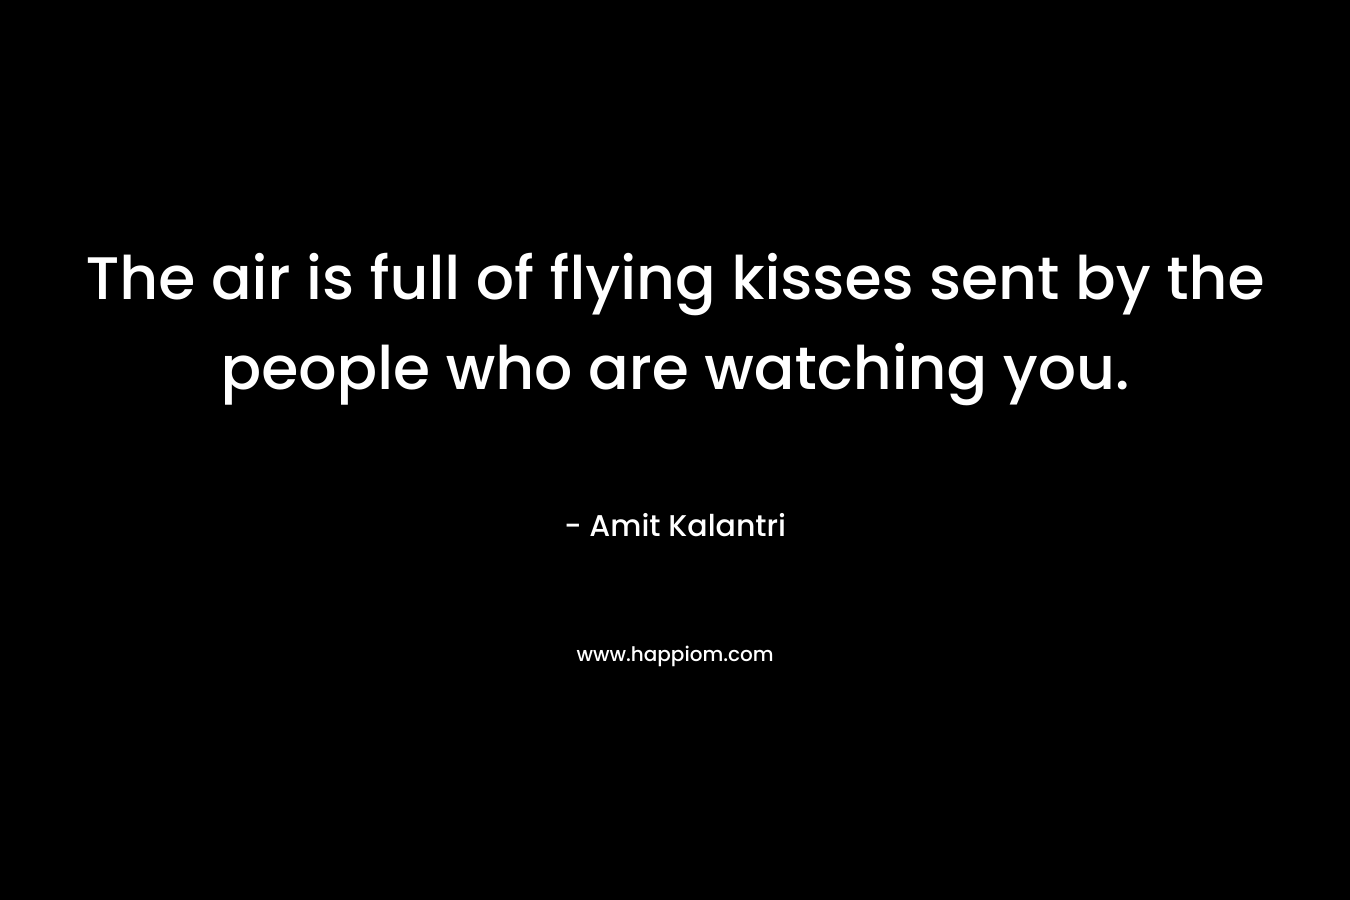 The air is full of flying kisses sent by the people who are watching you.